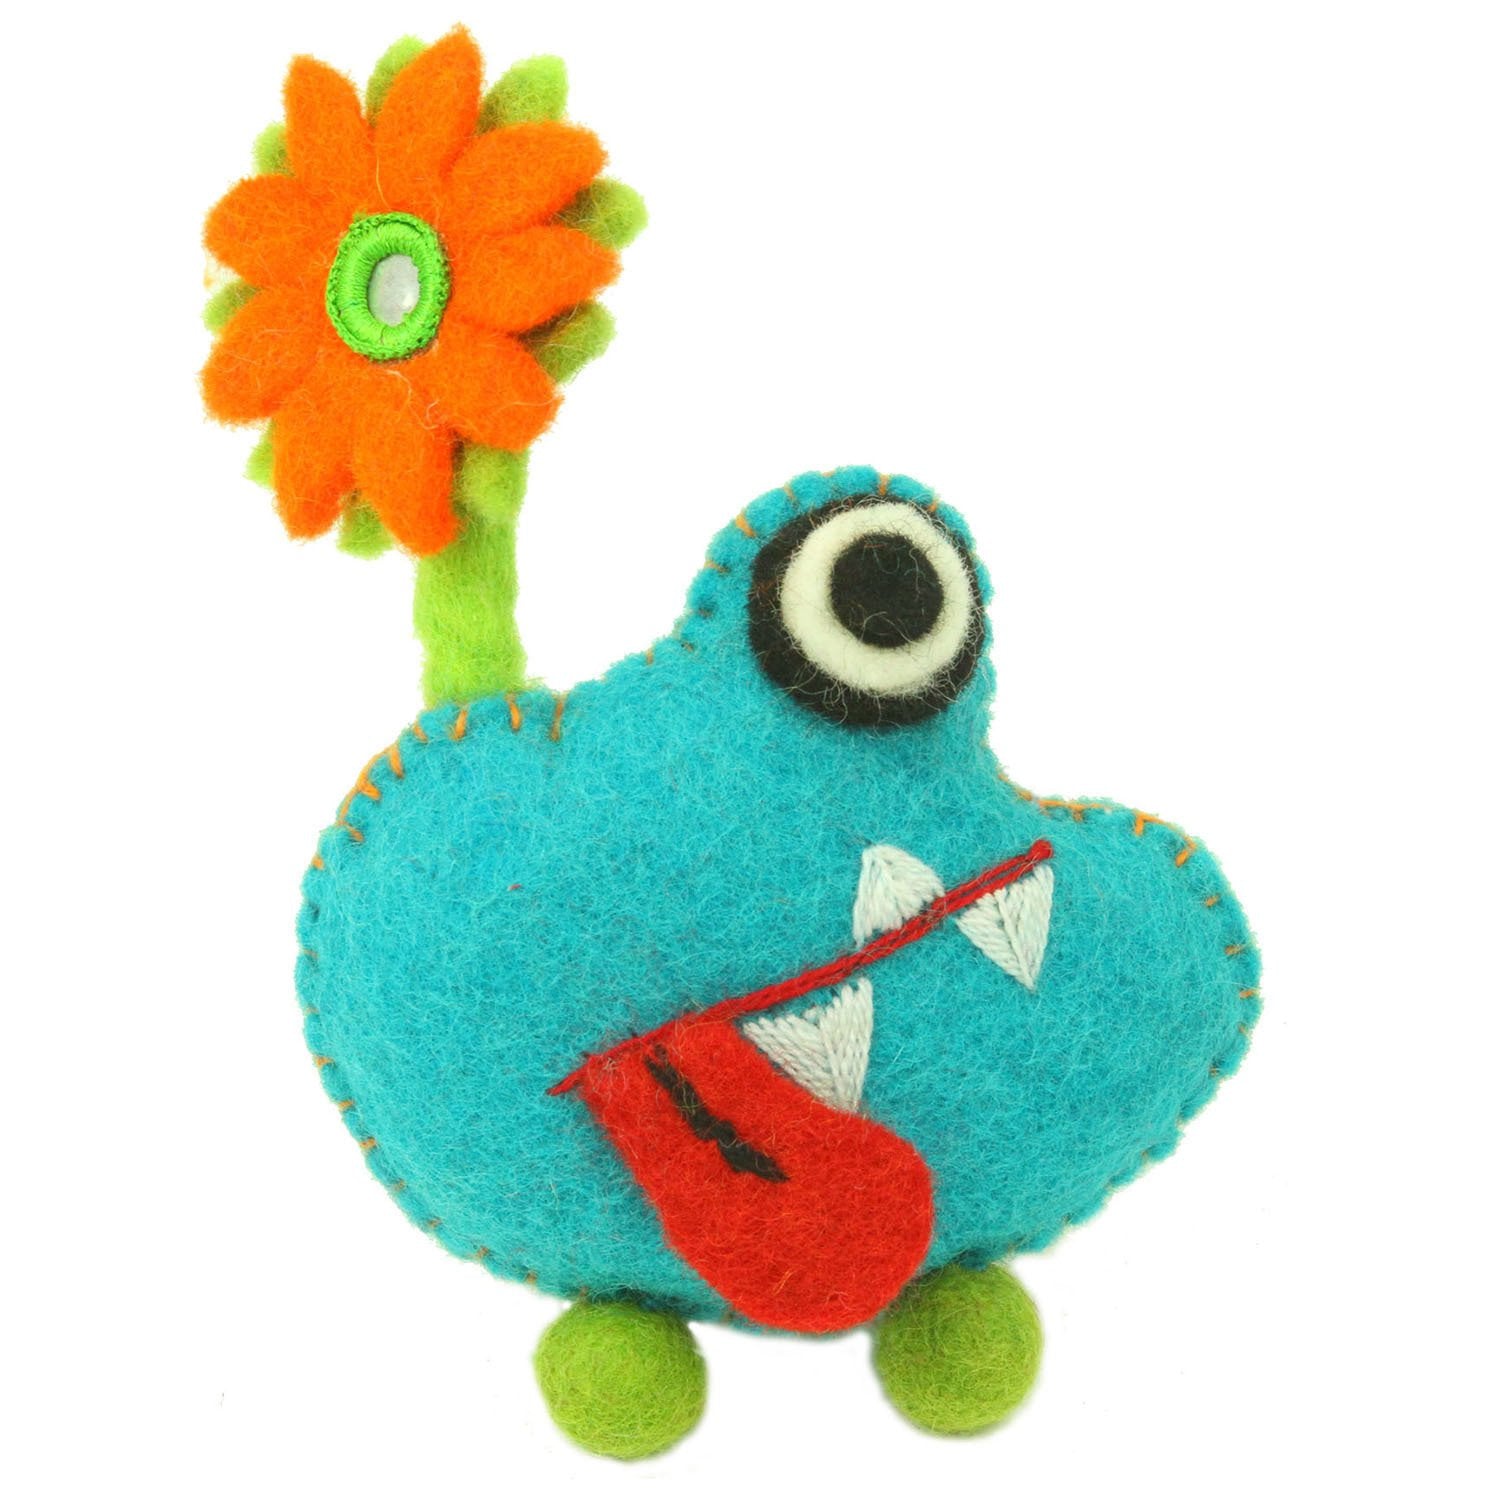 This Global Groove Life, handmade, ethical, fair trade, eco-friendly, sustainable, turquoise and green, tooth fairy monster,was created by artisans in Kathmandu Nepal and is adorned with an adorable flower motif.